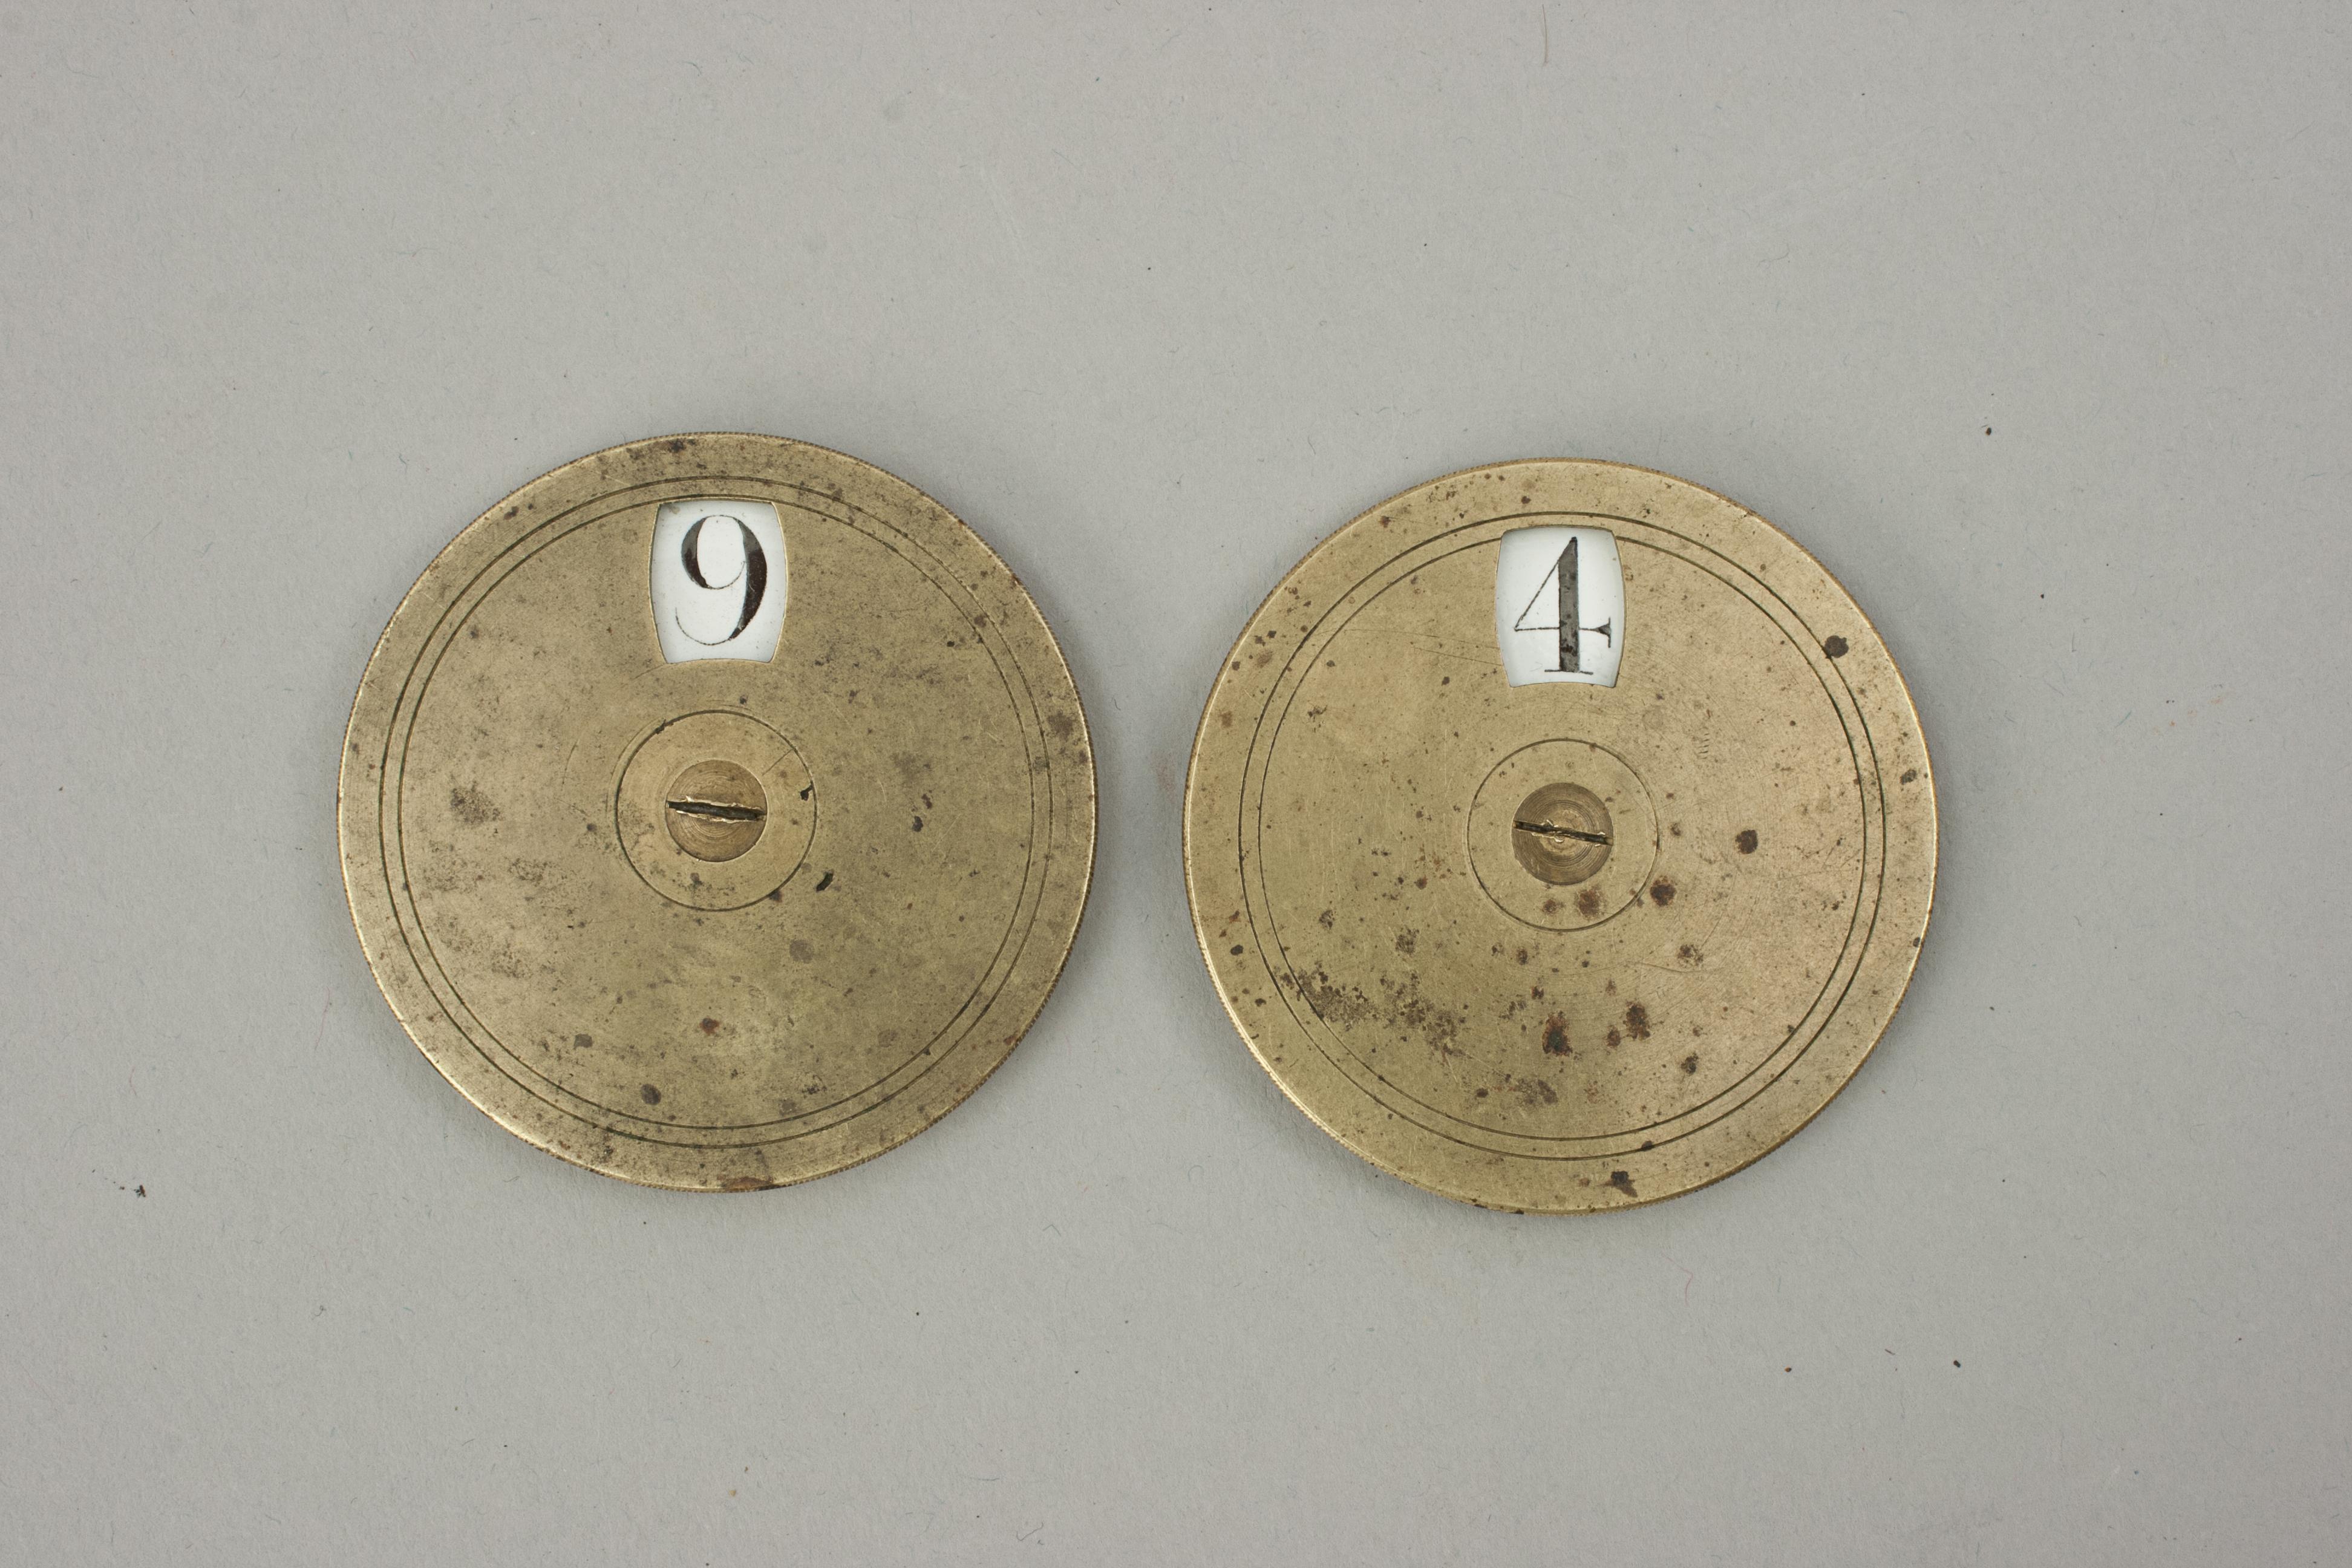 British Brass Circular Whist Score Markers For Sale